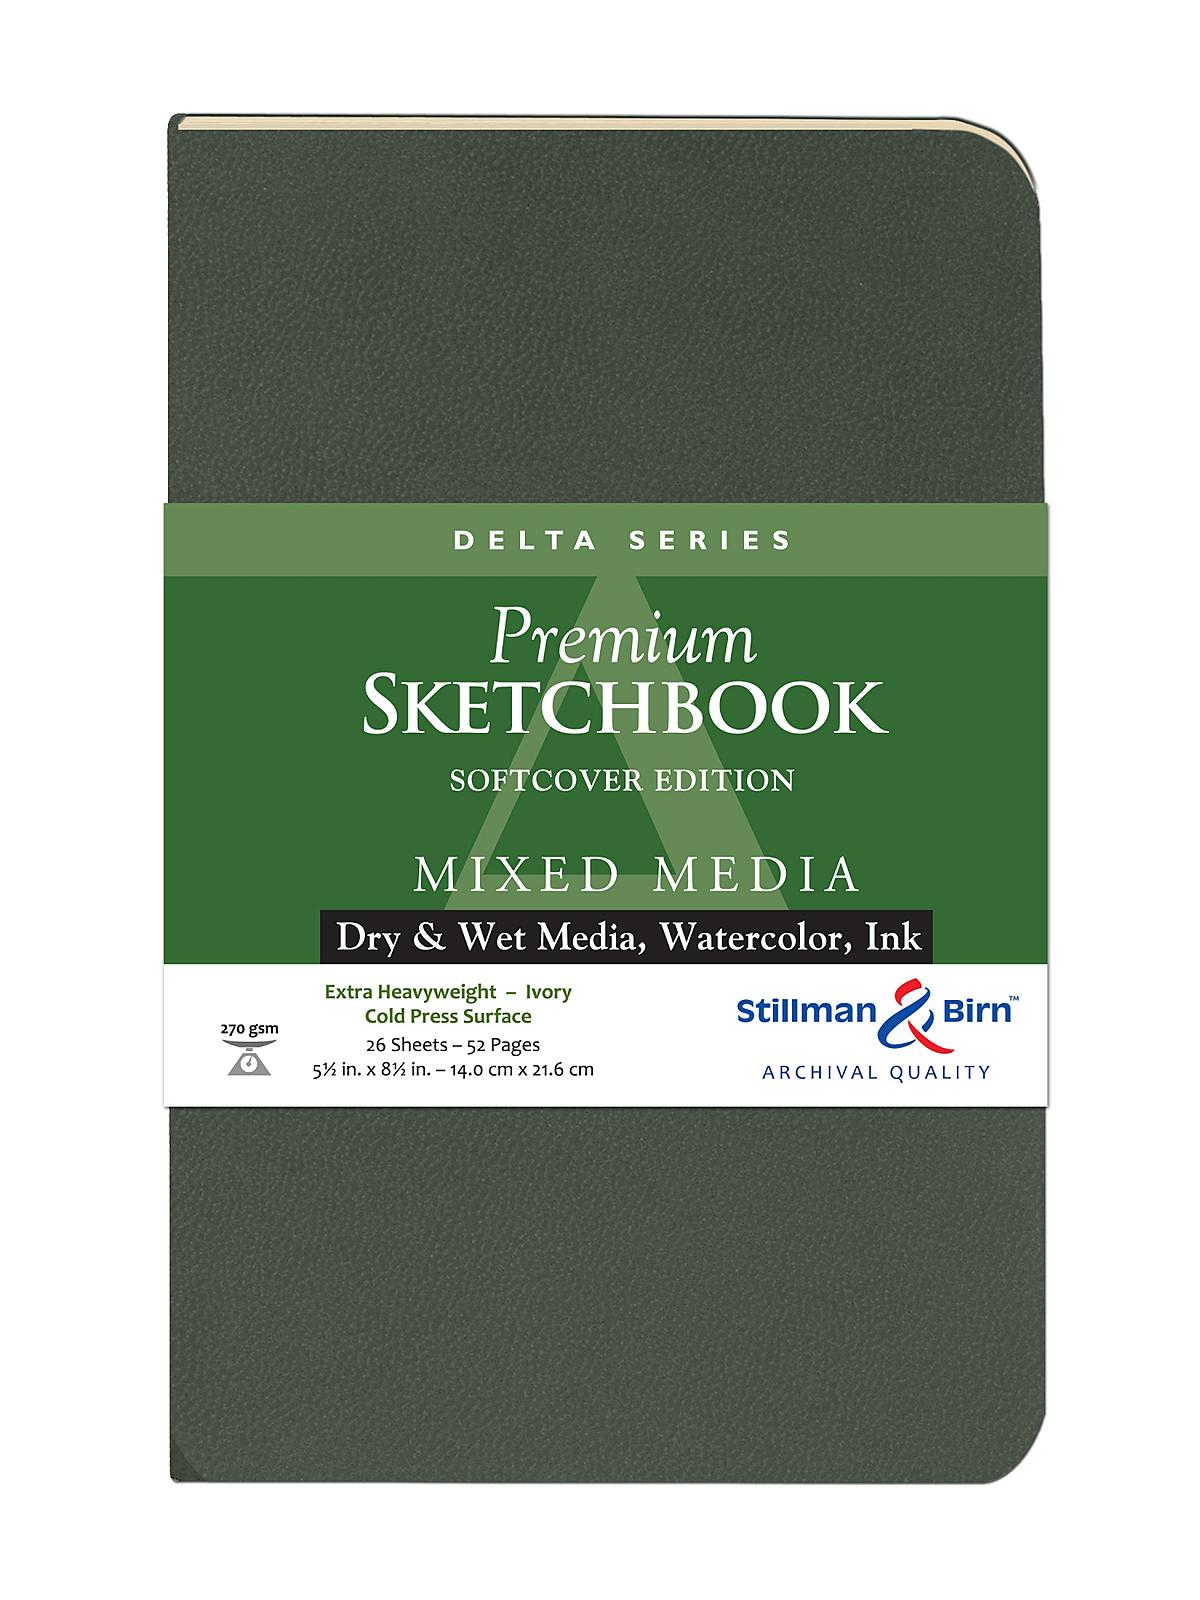 Delta Series Softcover Sketchbooks 5.5 In. X 8.5 In. Portrait 56 Pages